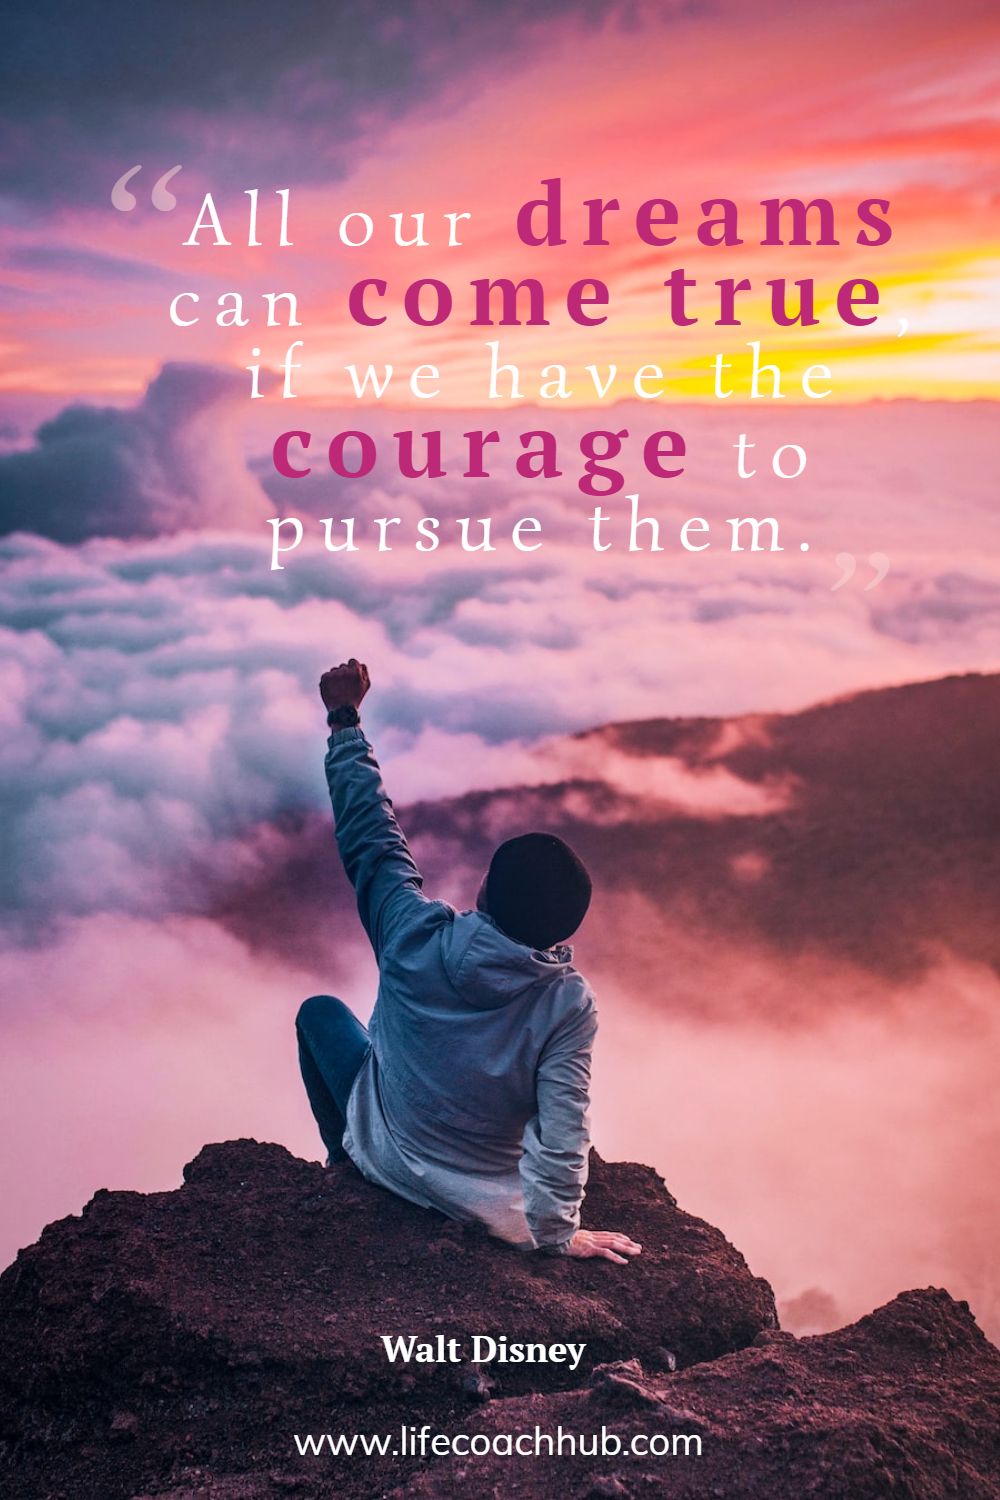 All our dreams can come true, if we have the courage to pursue them. Walt Disney Coaching Quote